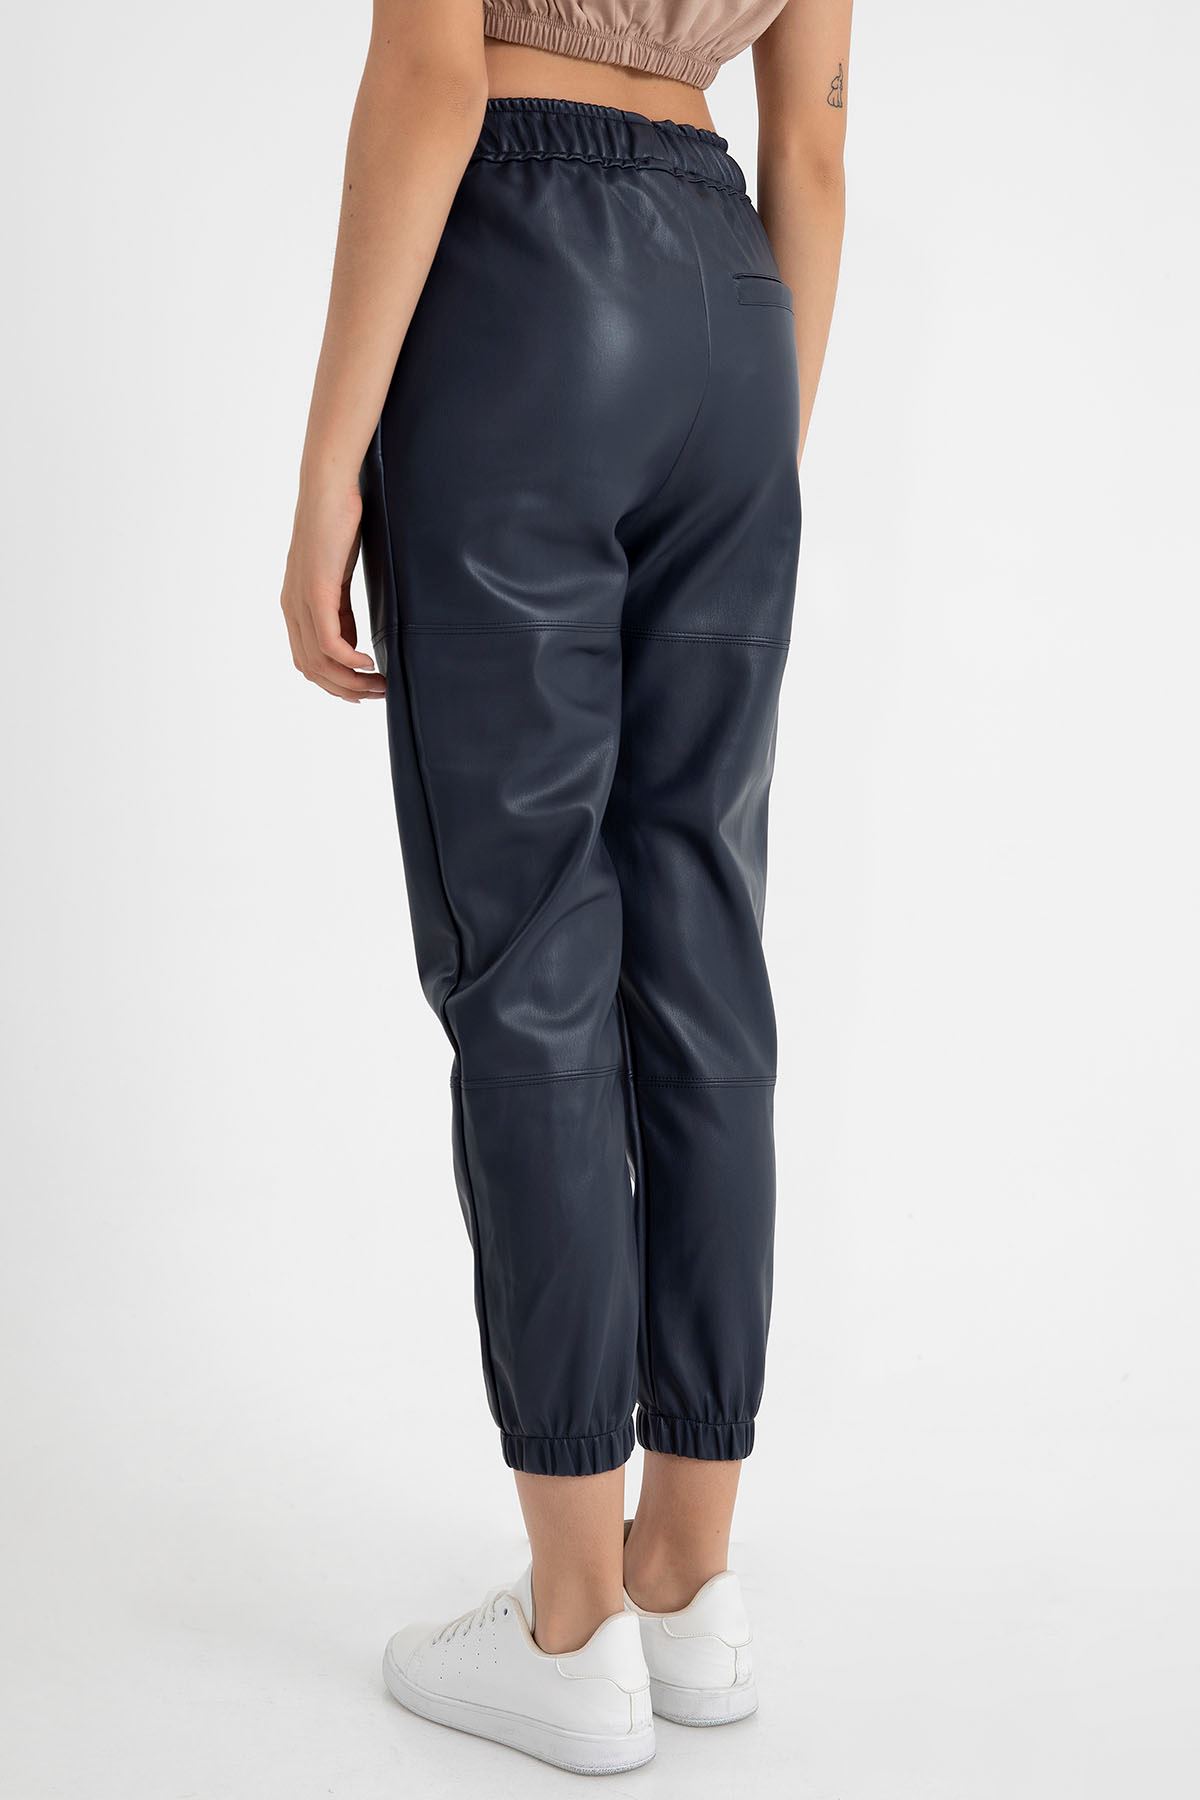 Faux Leather Comfy Fit Women'S Trouser With Elastic Hems - Navy Blue 